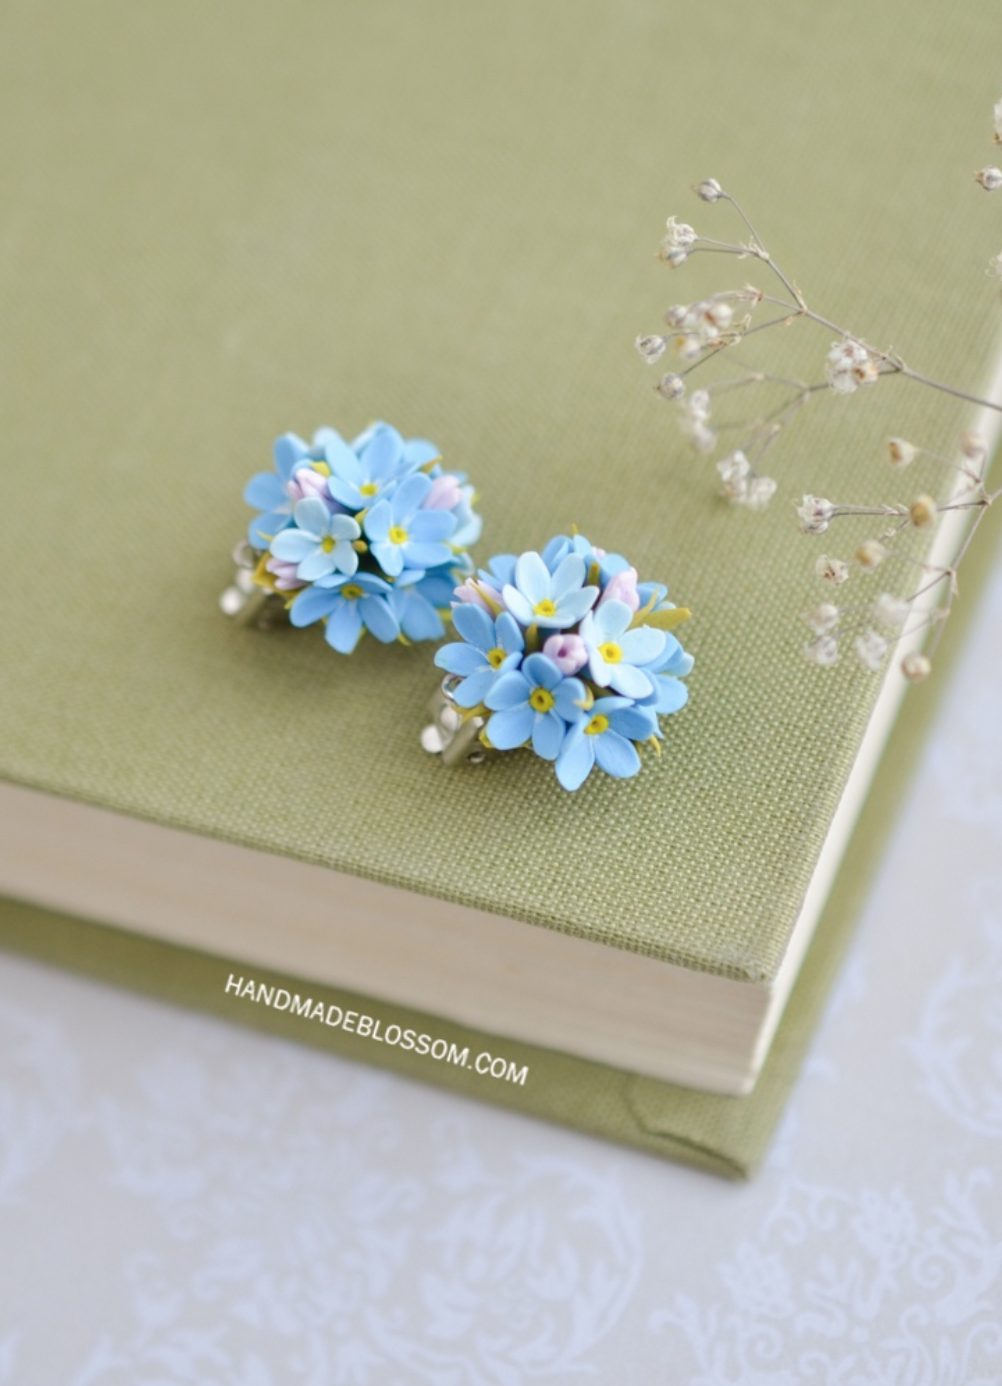 Forget me not clip on earrings